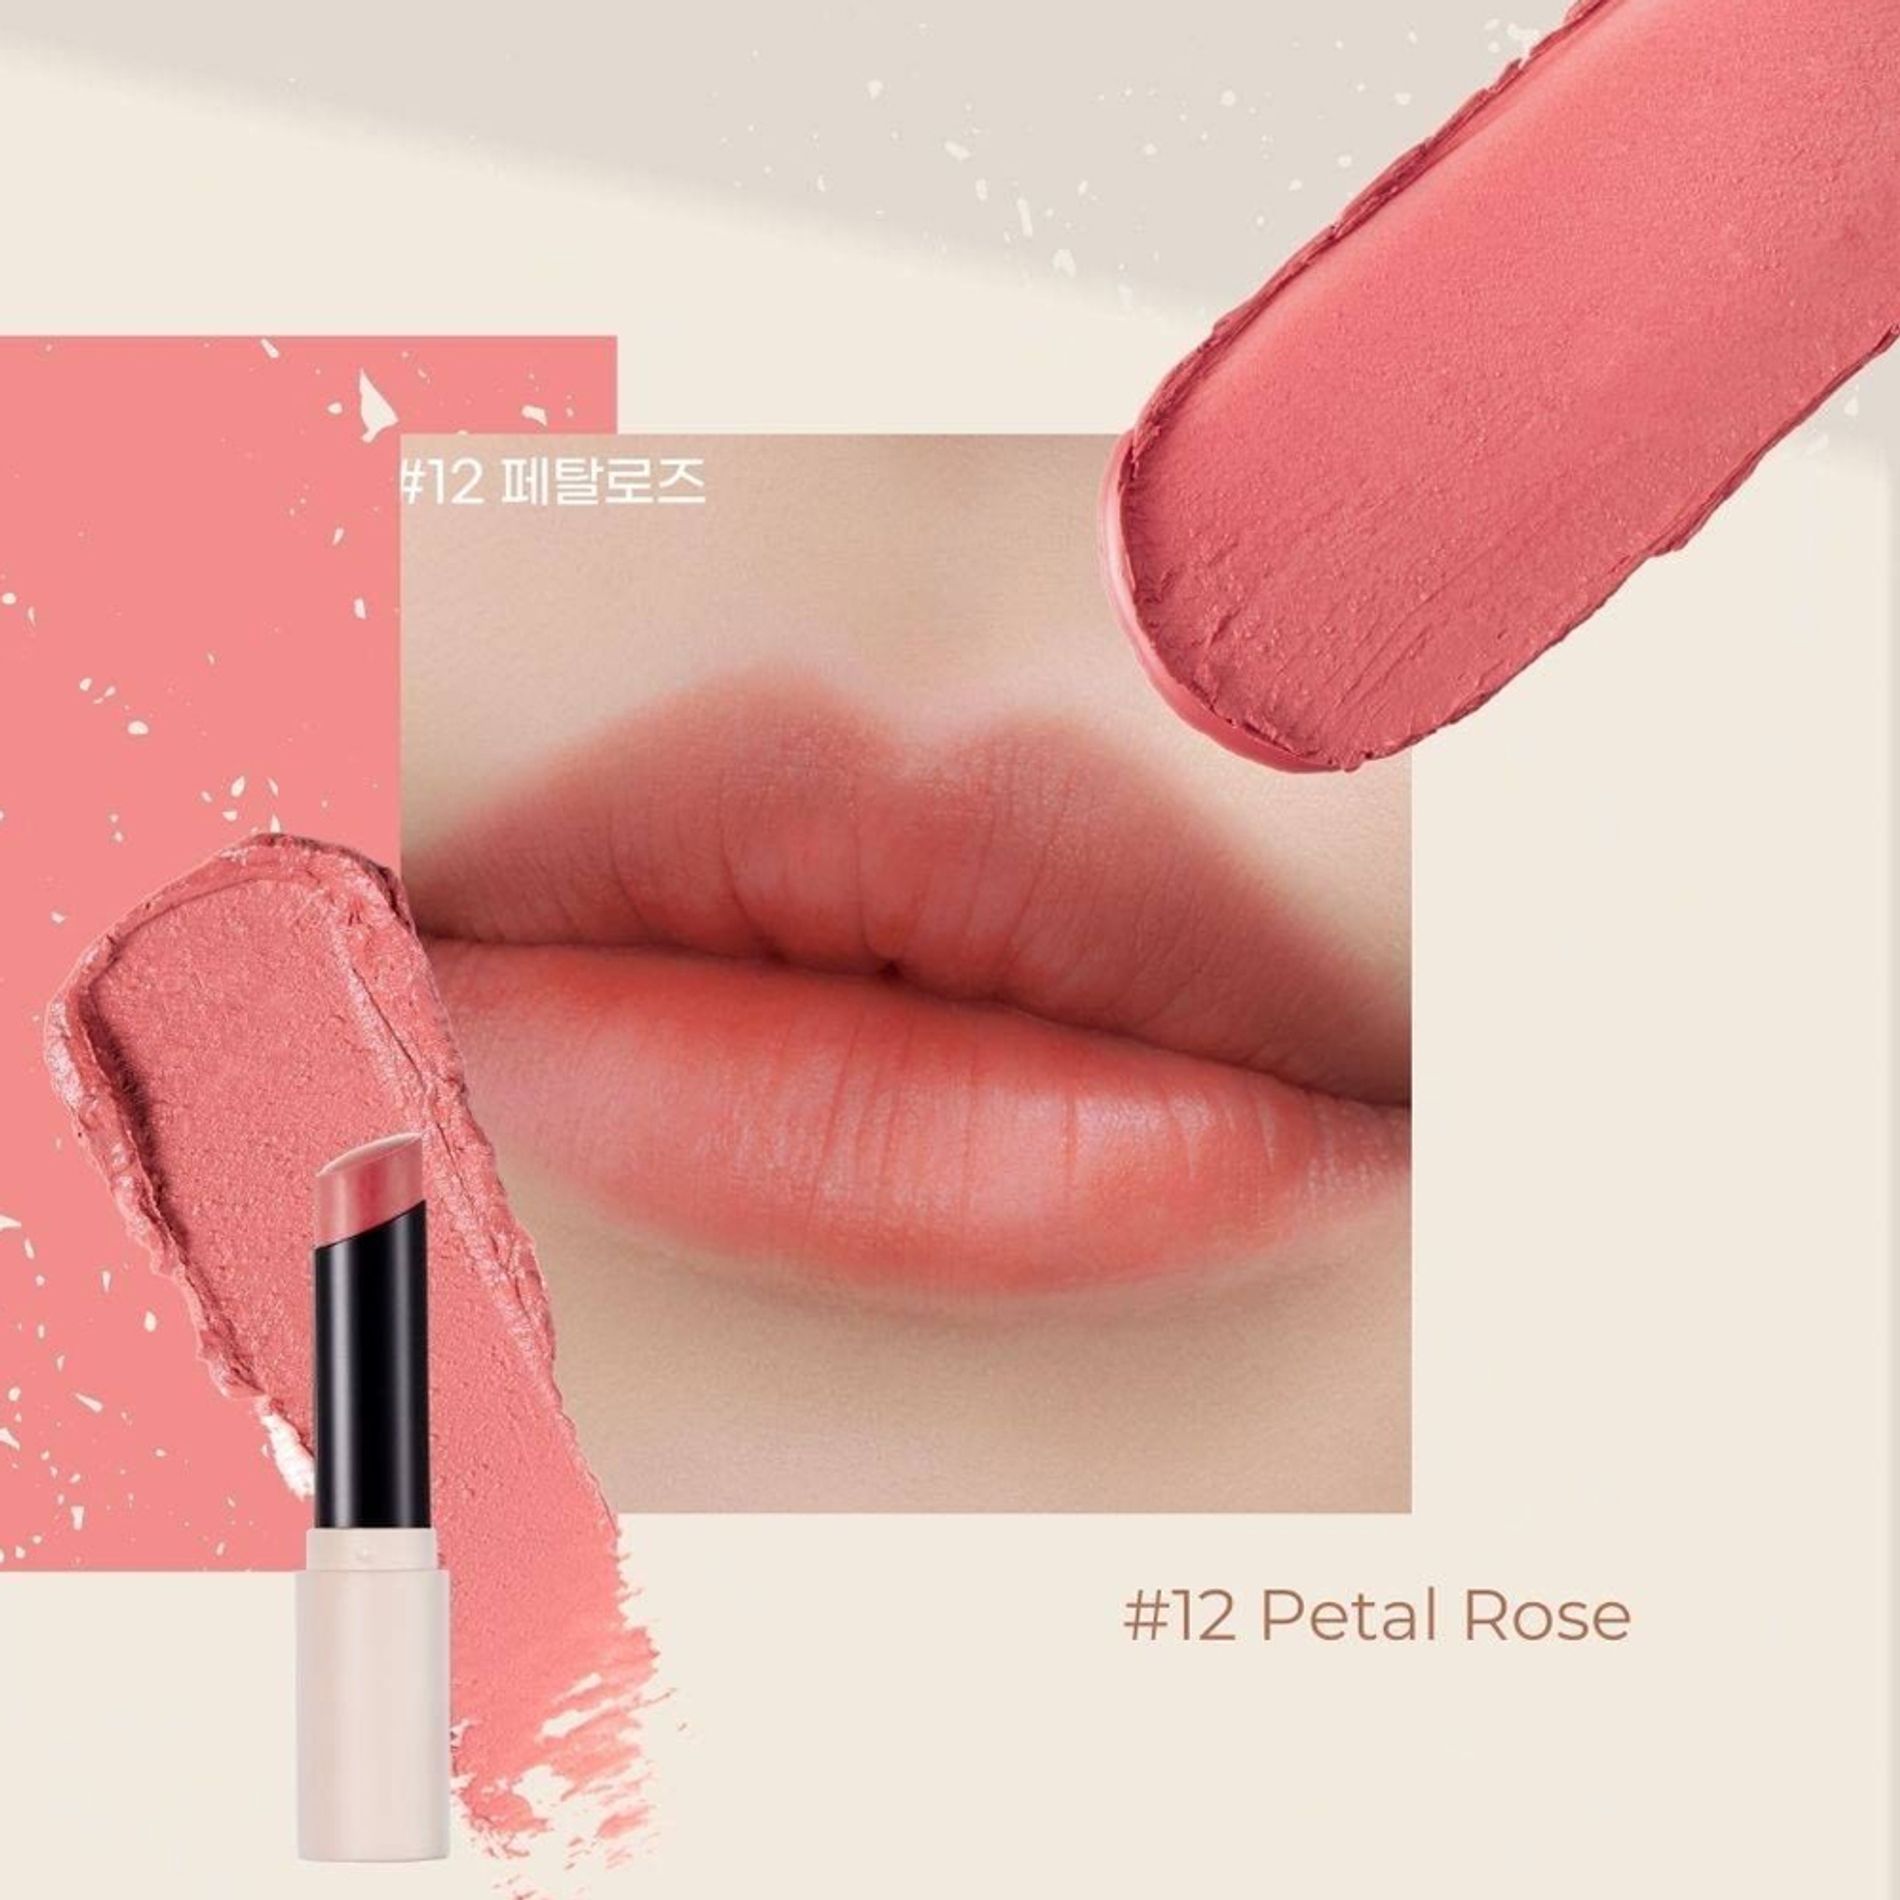 fmgt-son-thoi-li-min-fmgt-thefaceshop-rosy-nude-ink-sheer-matte-lipstick-10